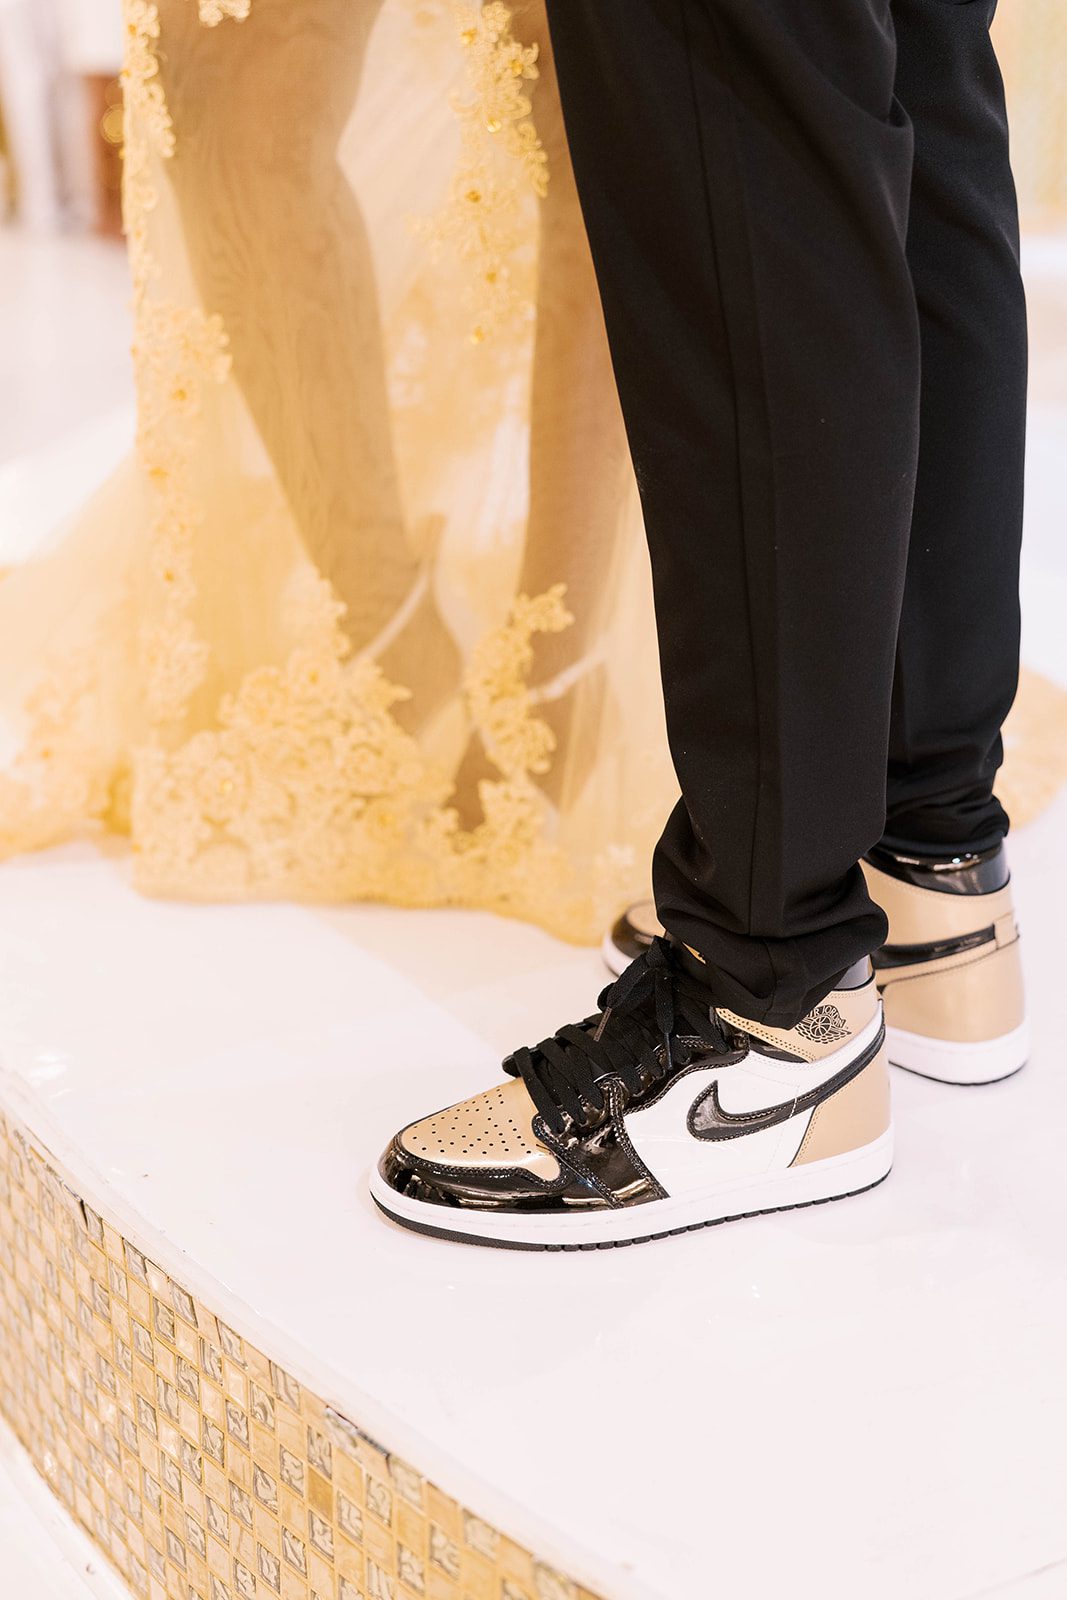 detail shot of grooms nike shoes that are gold and black to match his wedding suit